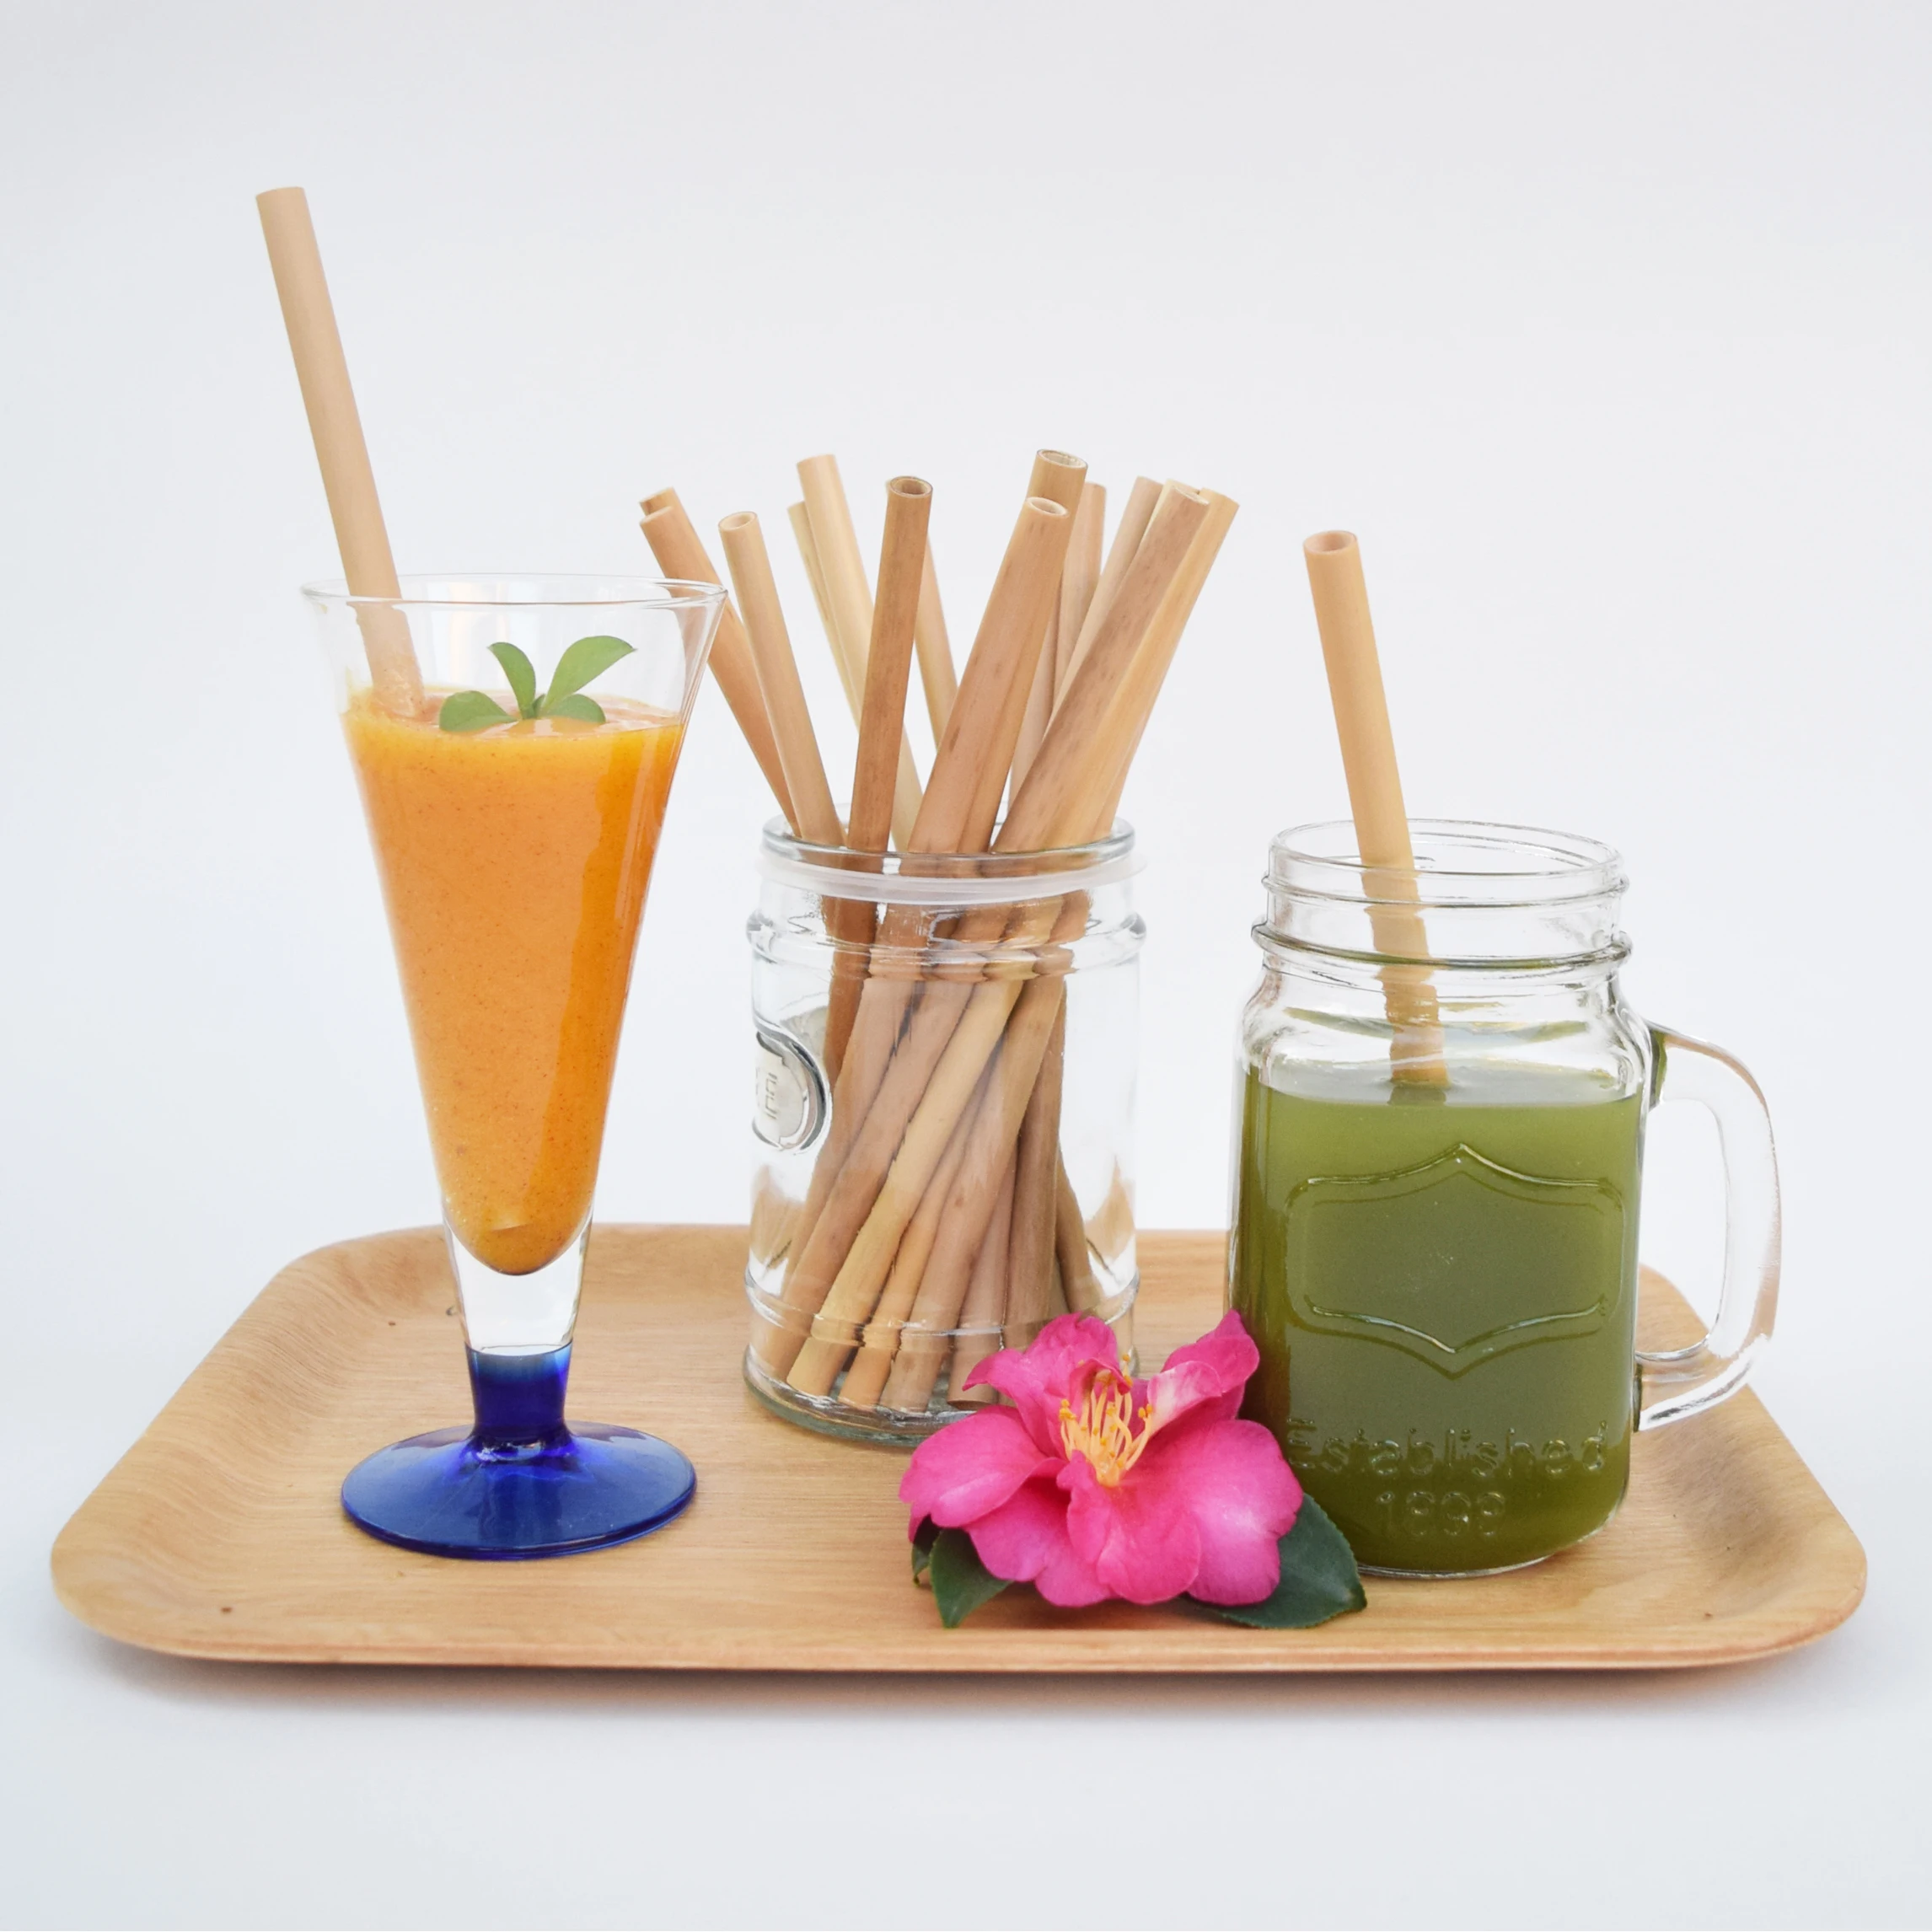 
Best Quality 2020 Natural Reusable Bamboo Drinking Straws Eco Friendly Environmentally Biodegradable Made in Wahapy Straws Vietn 